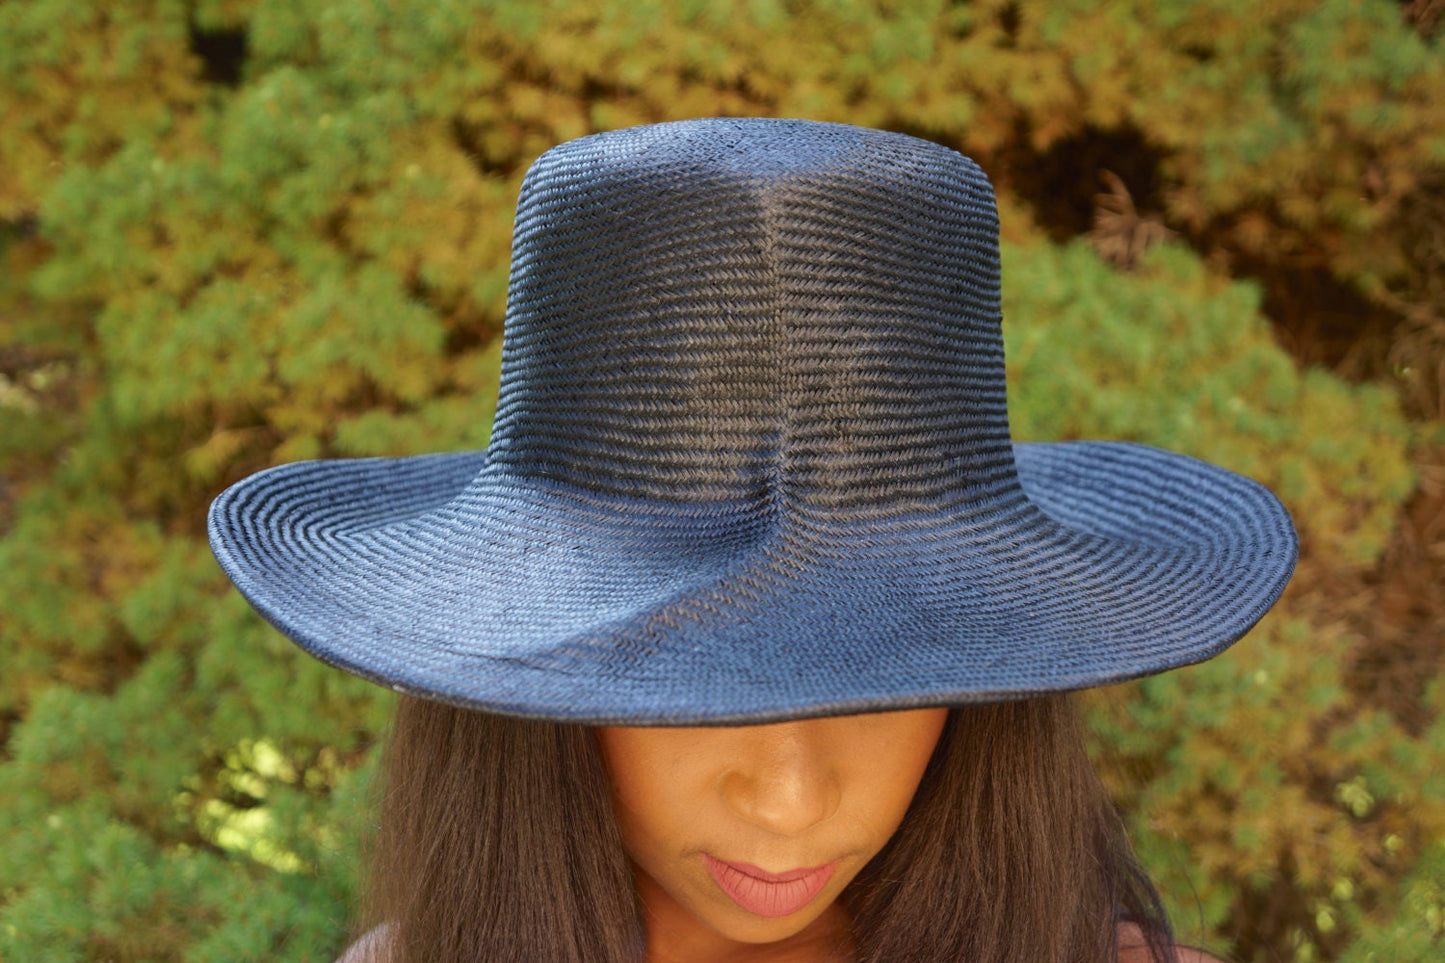 Black Parasisal Straw Sculptured Hat with Brim-Wedding-Race hat-Polo Matches-Chruch hat-summer hat-Perfect for the beach-Destination wedding